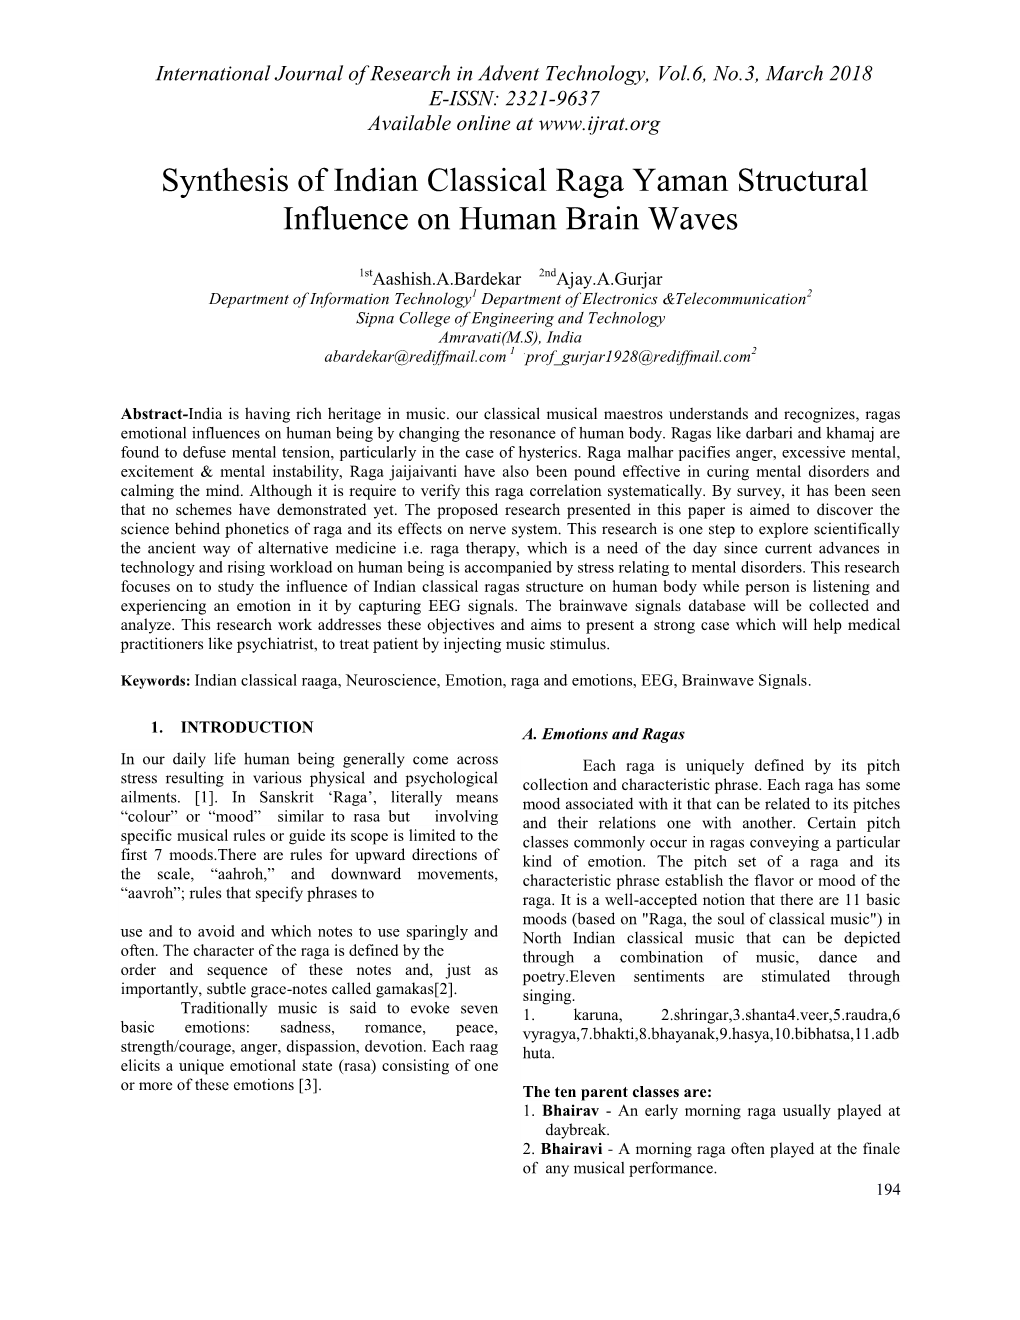 Synthesis of Indian Classical Raga Yaman Structural Influence on Human Brain Waves